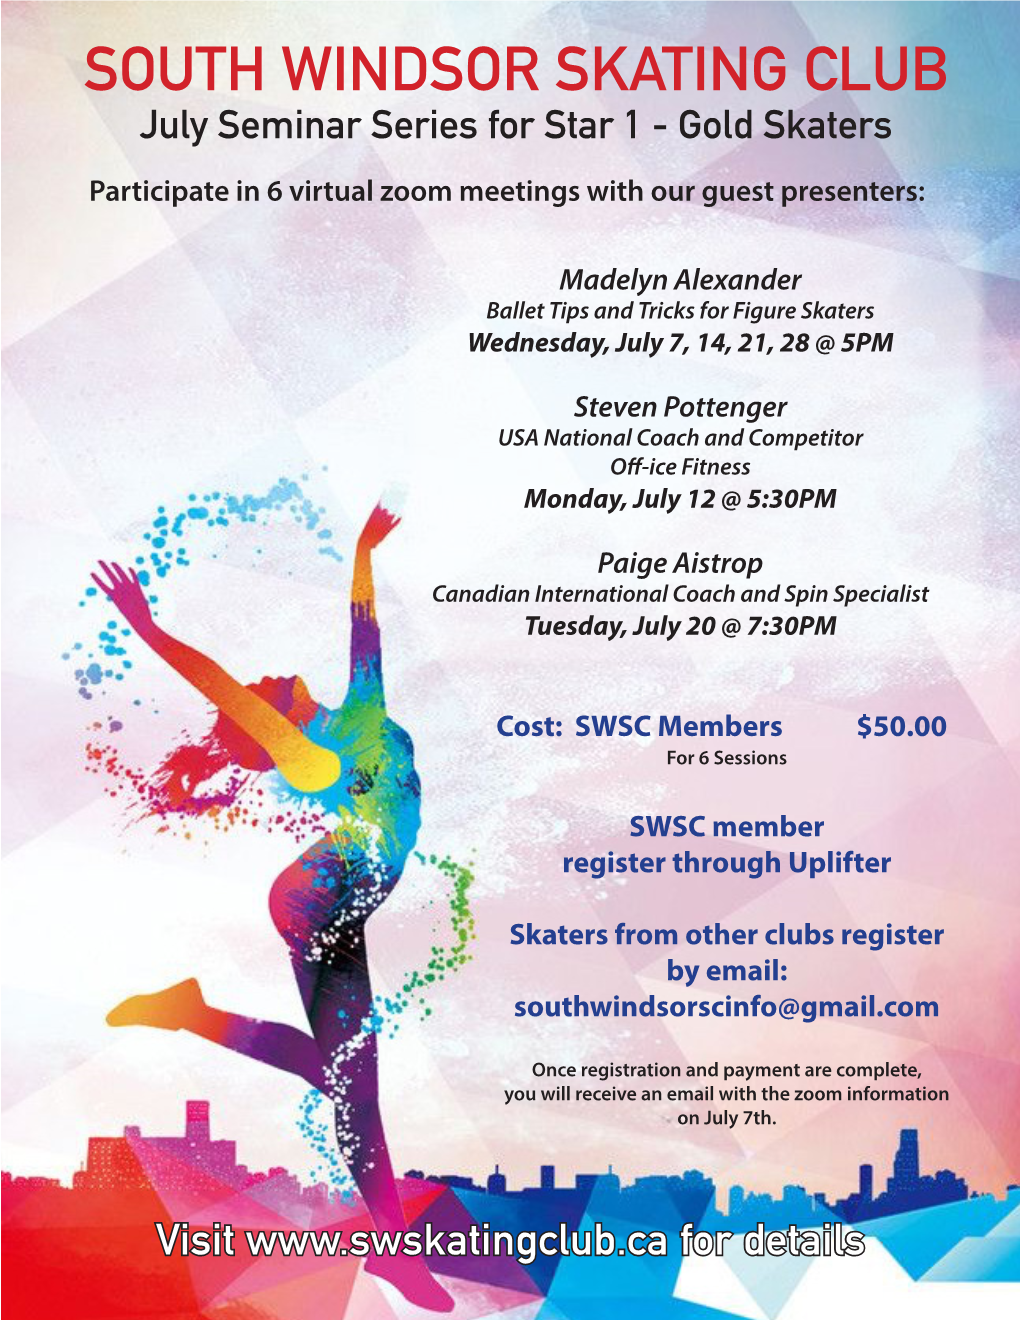 July Seminar Series for Star 1 - Gold Skaters Participate in 6 Virtual Zoom Meetings with Our Guest Presenters